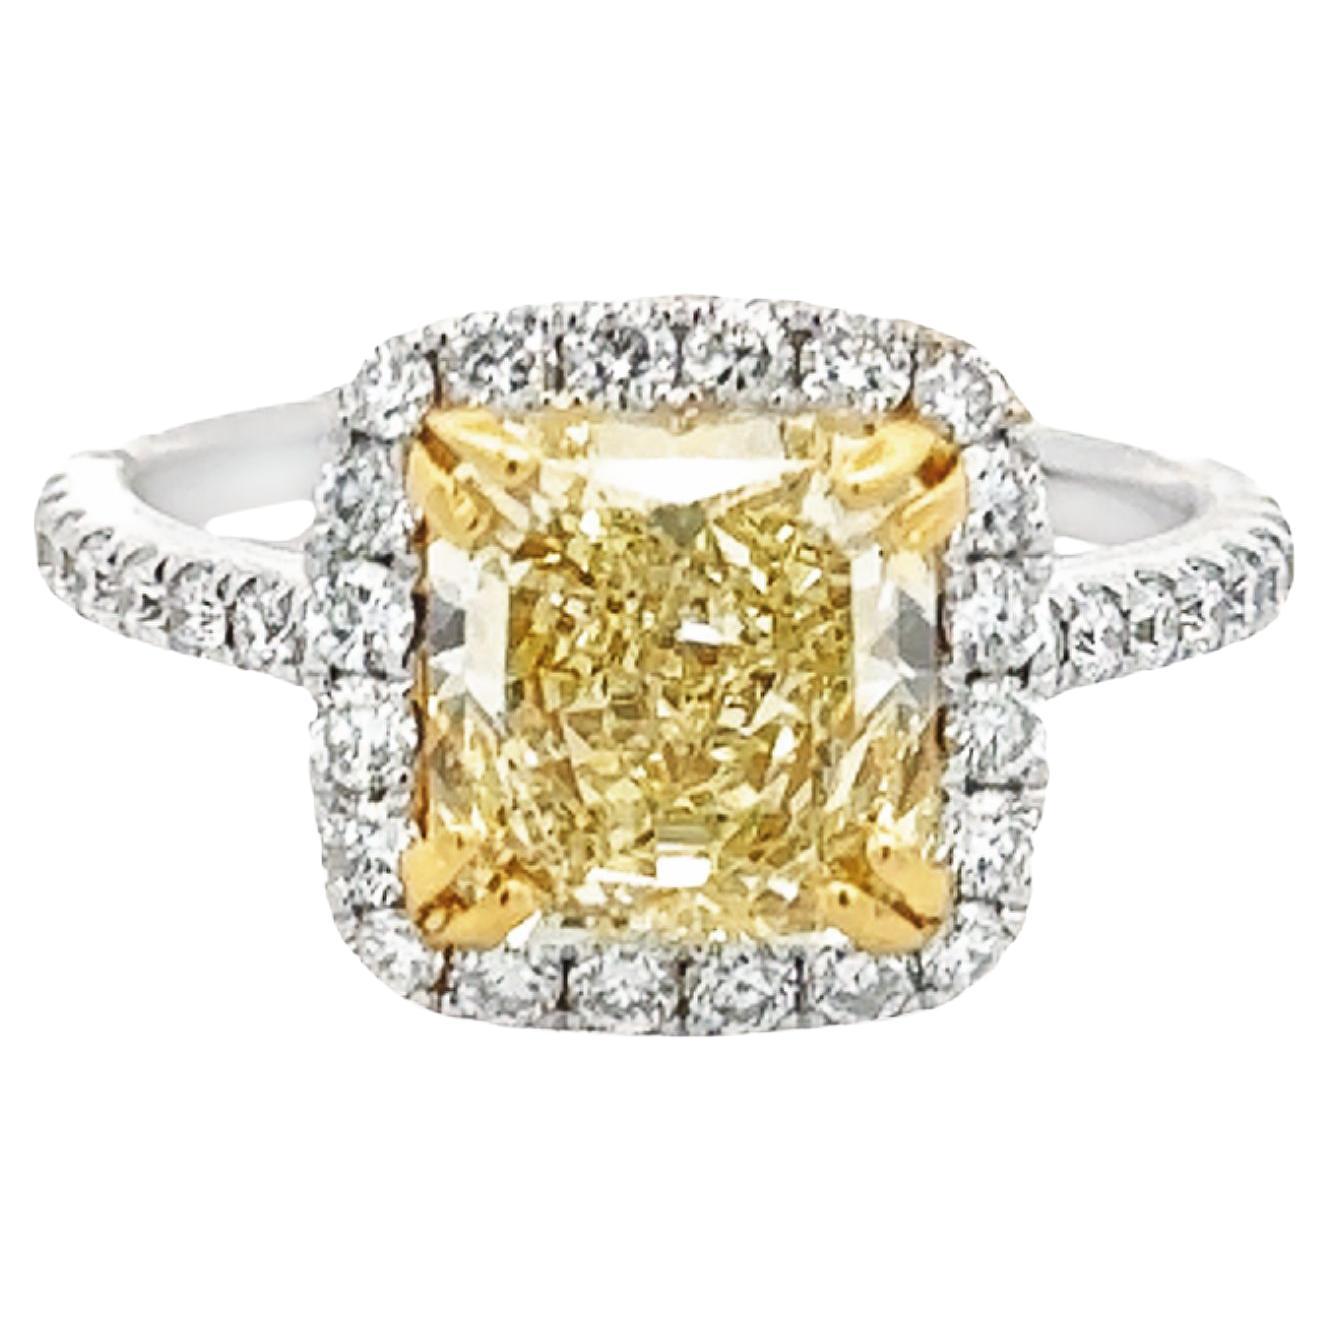 GIA Certified 2.55 carat Fancy Light Yellow VS1 Radiant Cut Halo Ring For Sale